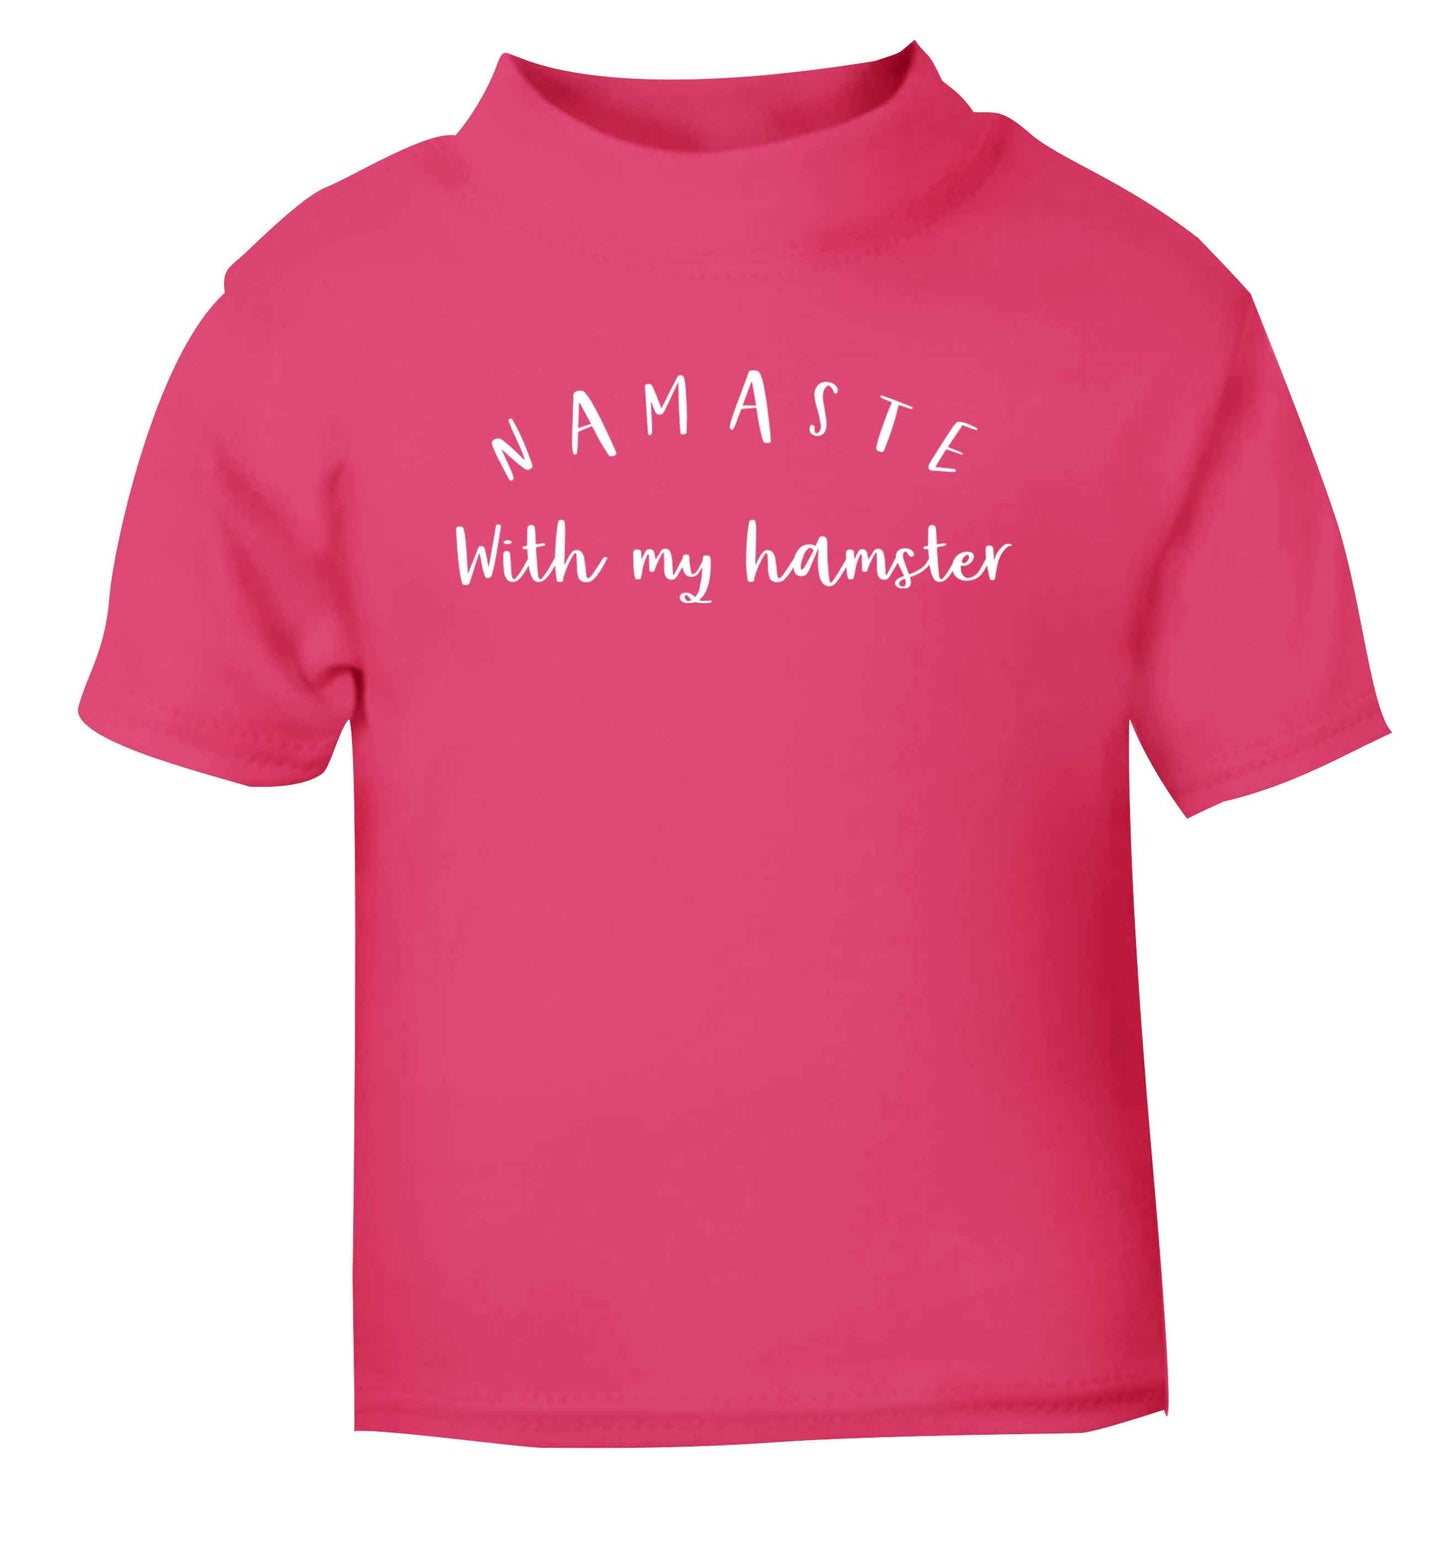 Namaste with my hamster pink Baby Toddler Tshirt 2 Years